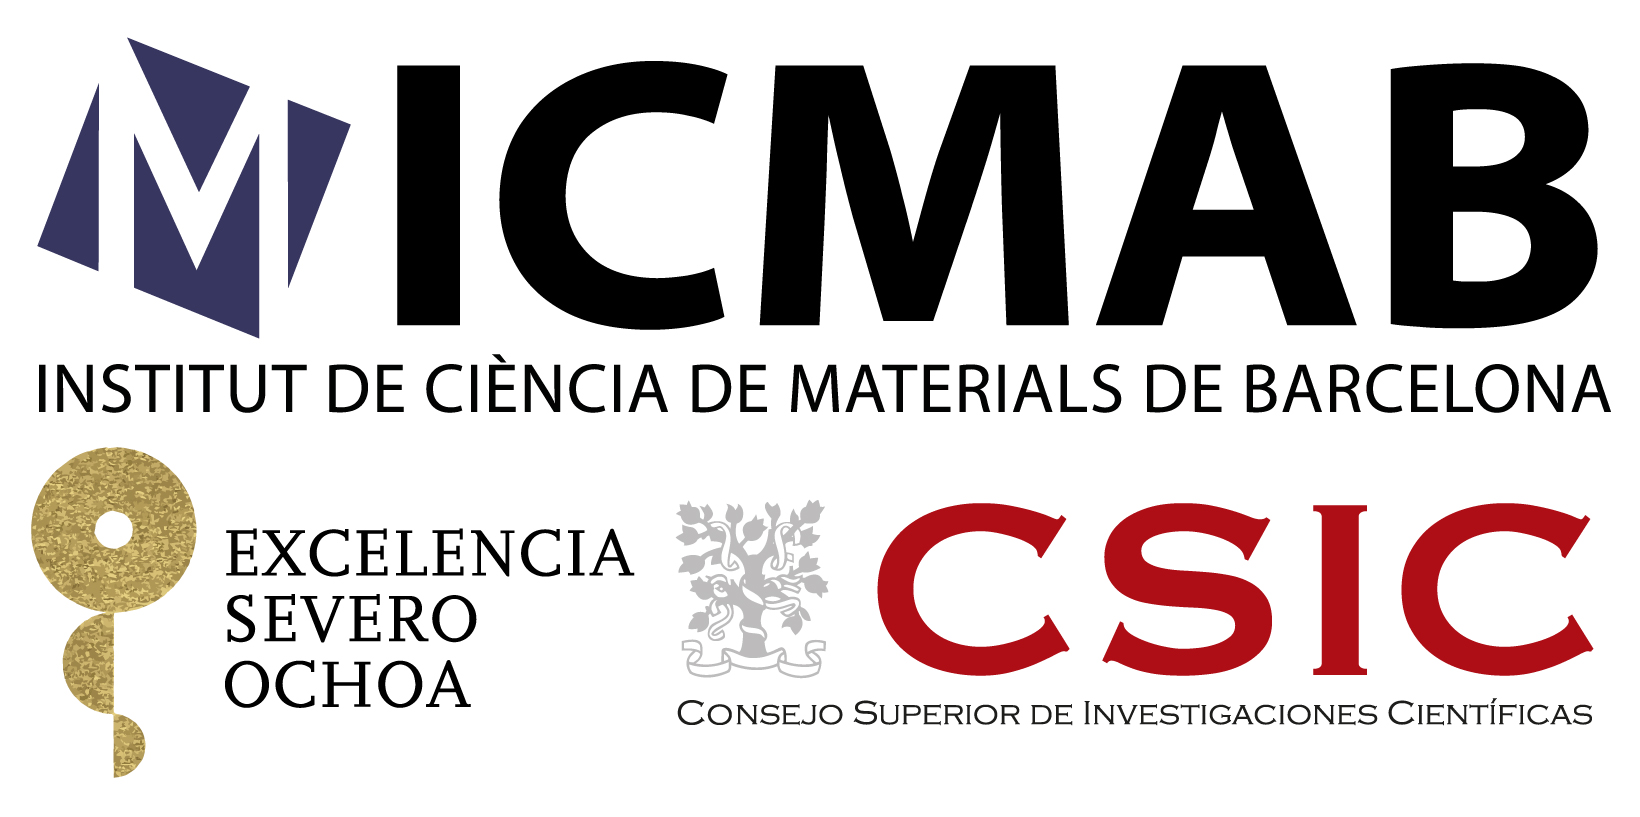 ICAMB